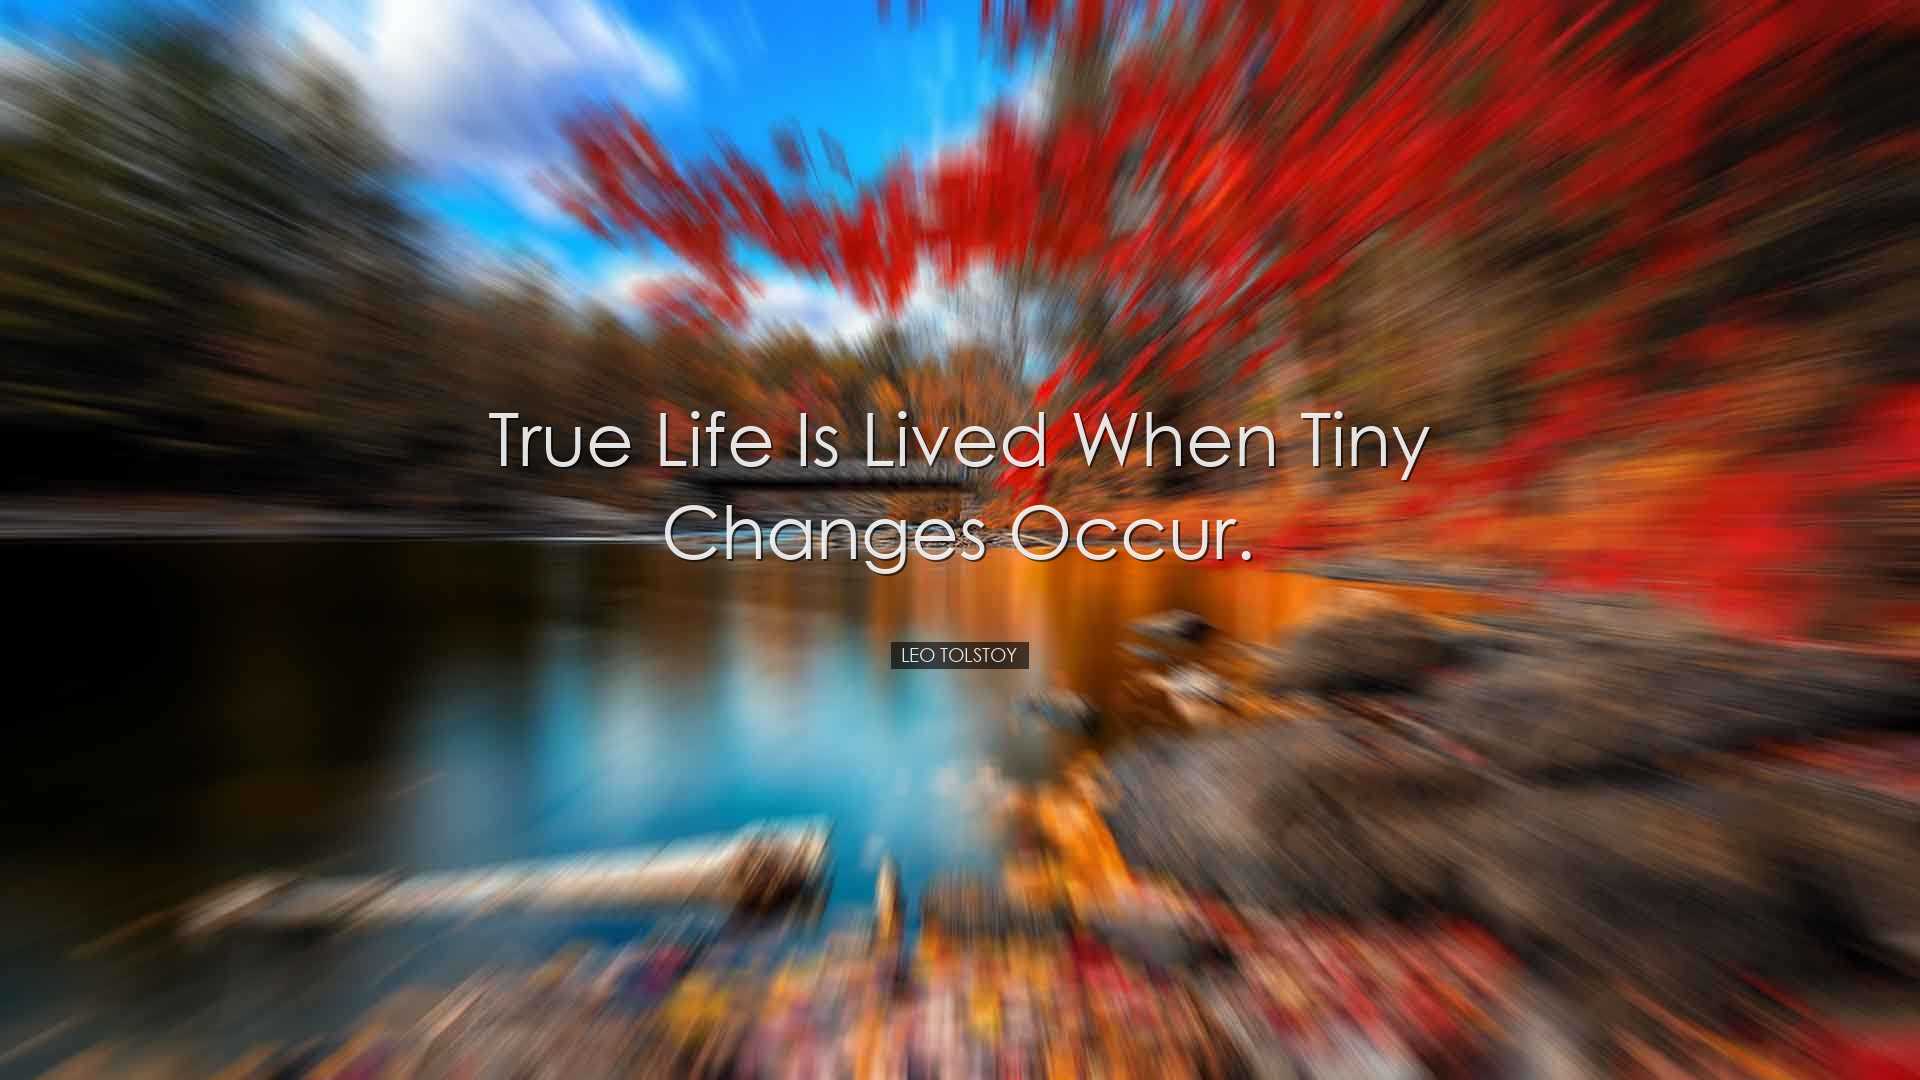 True life is lived when tiny changes occur. - Leo Tolstoy